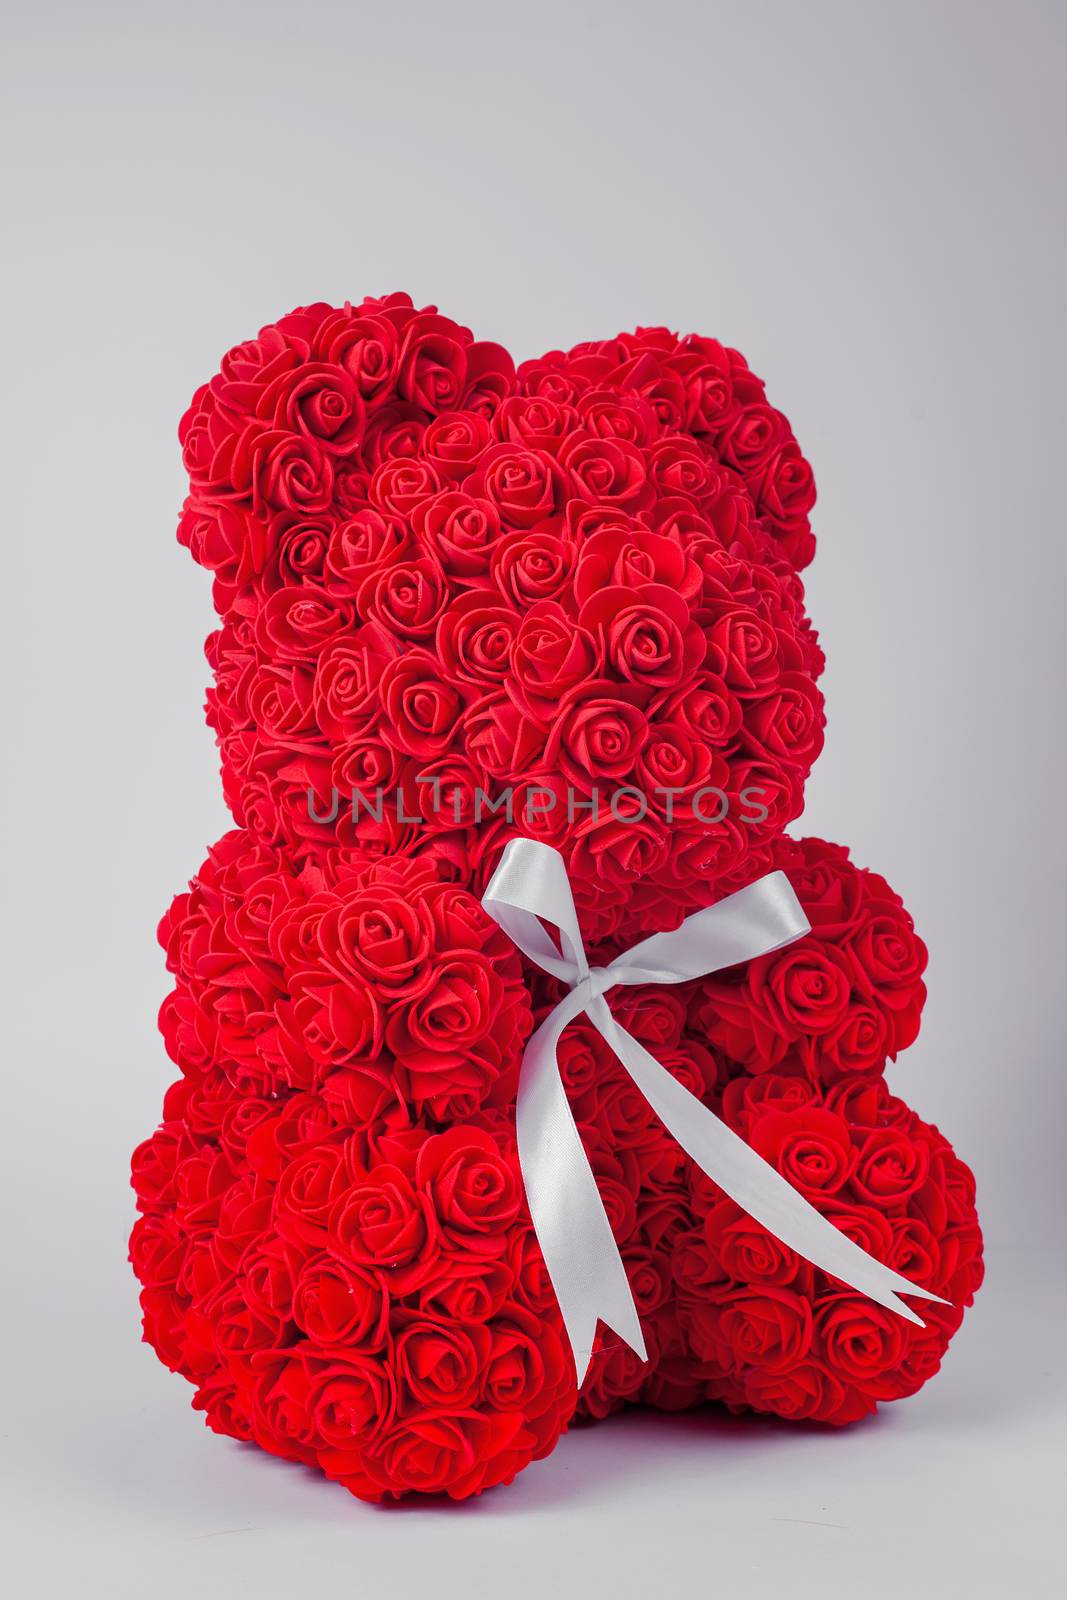 Red  teddy bear toy of foamirane roses. White stripe on teddy neck. Stock photo isolated on white background. by alexsdriver